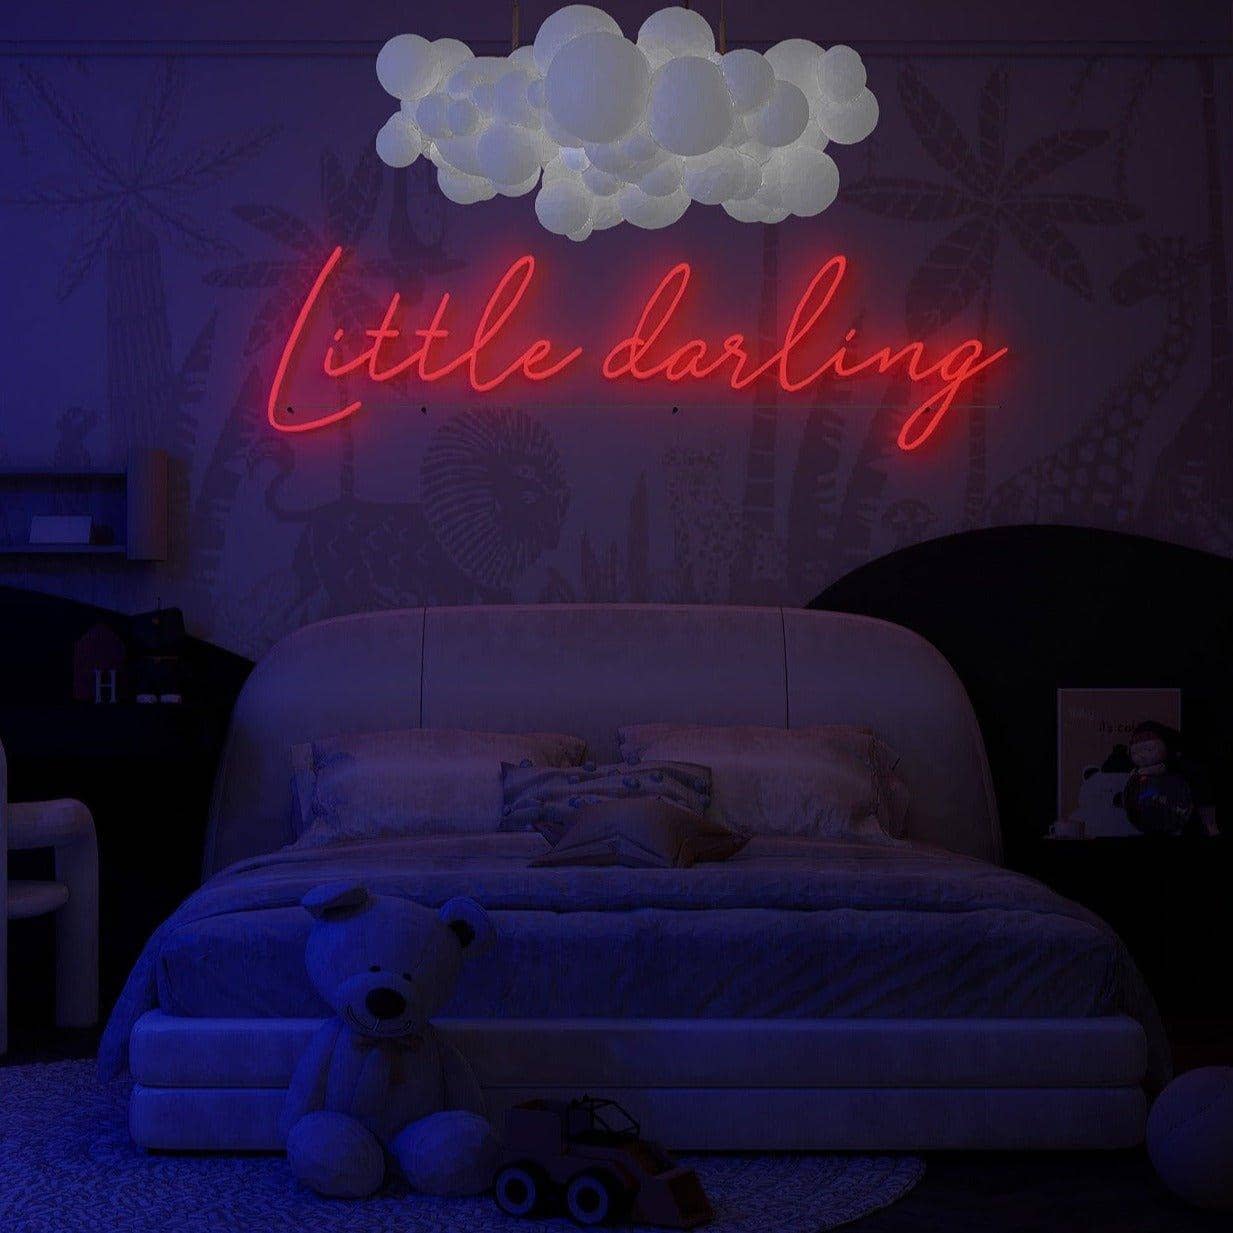 red-neon-lights-are-lit-up-and-displayed-in-the-bedroom-at-night-little-darling